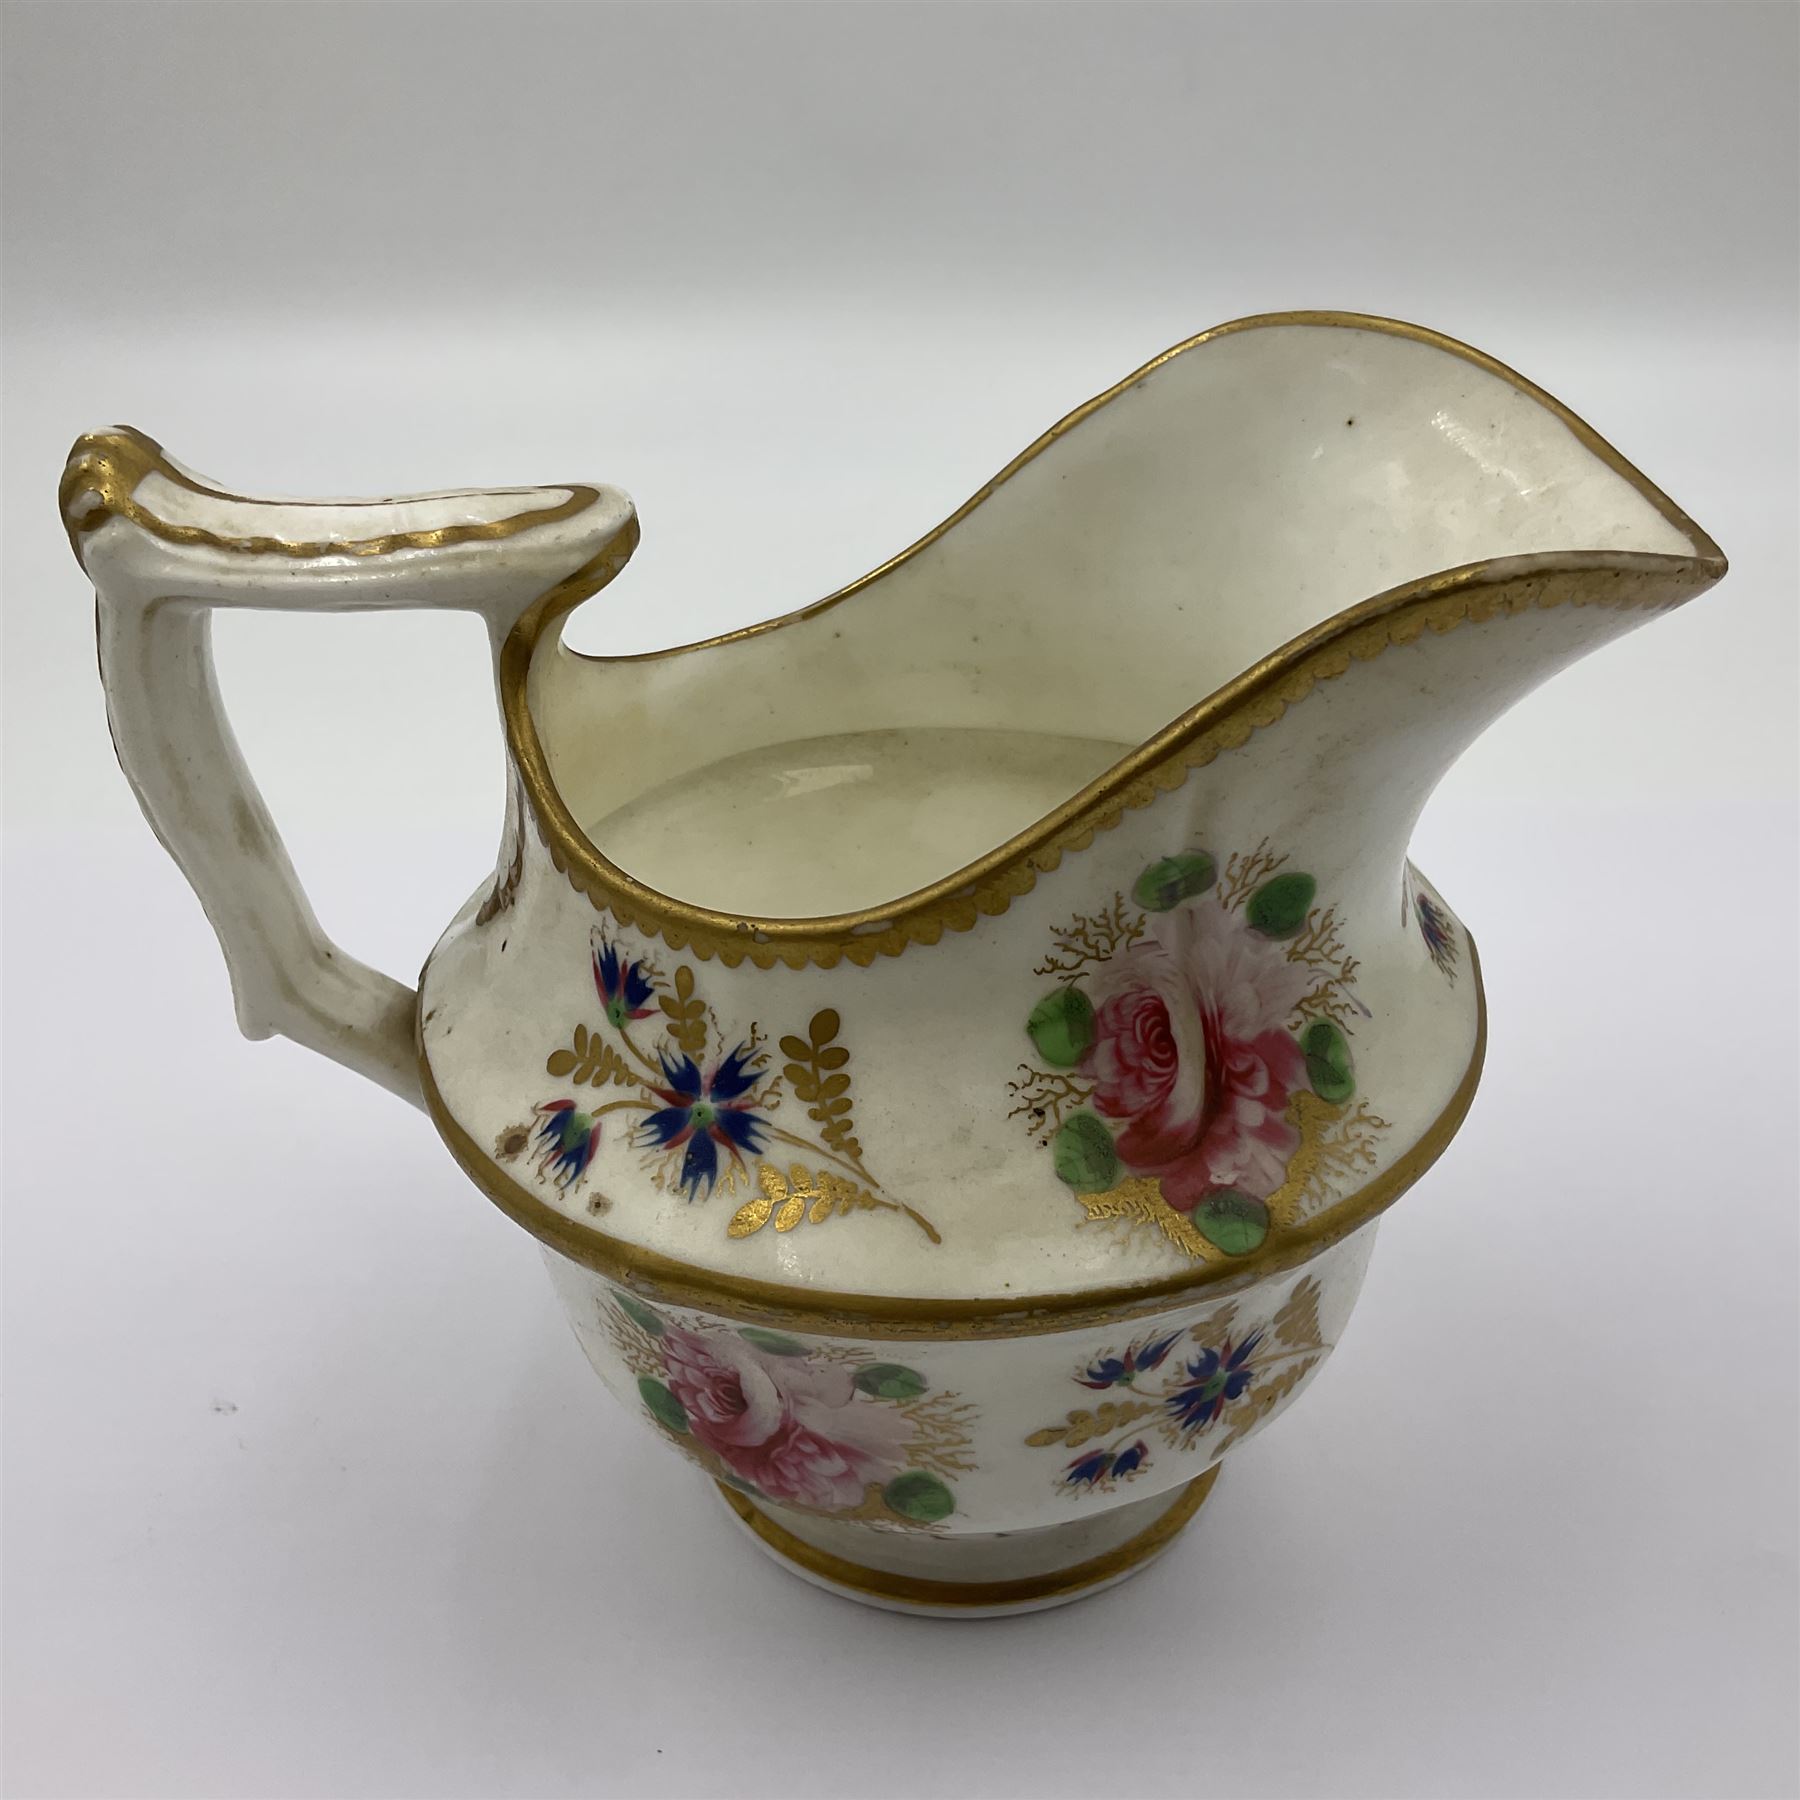 19th century Thomas Goode and Co jug - Image 11 of 22